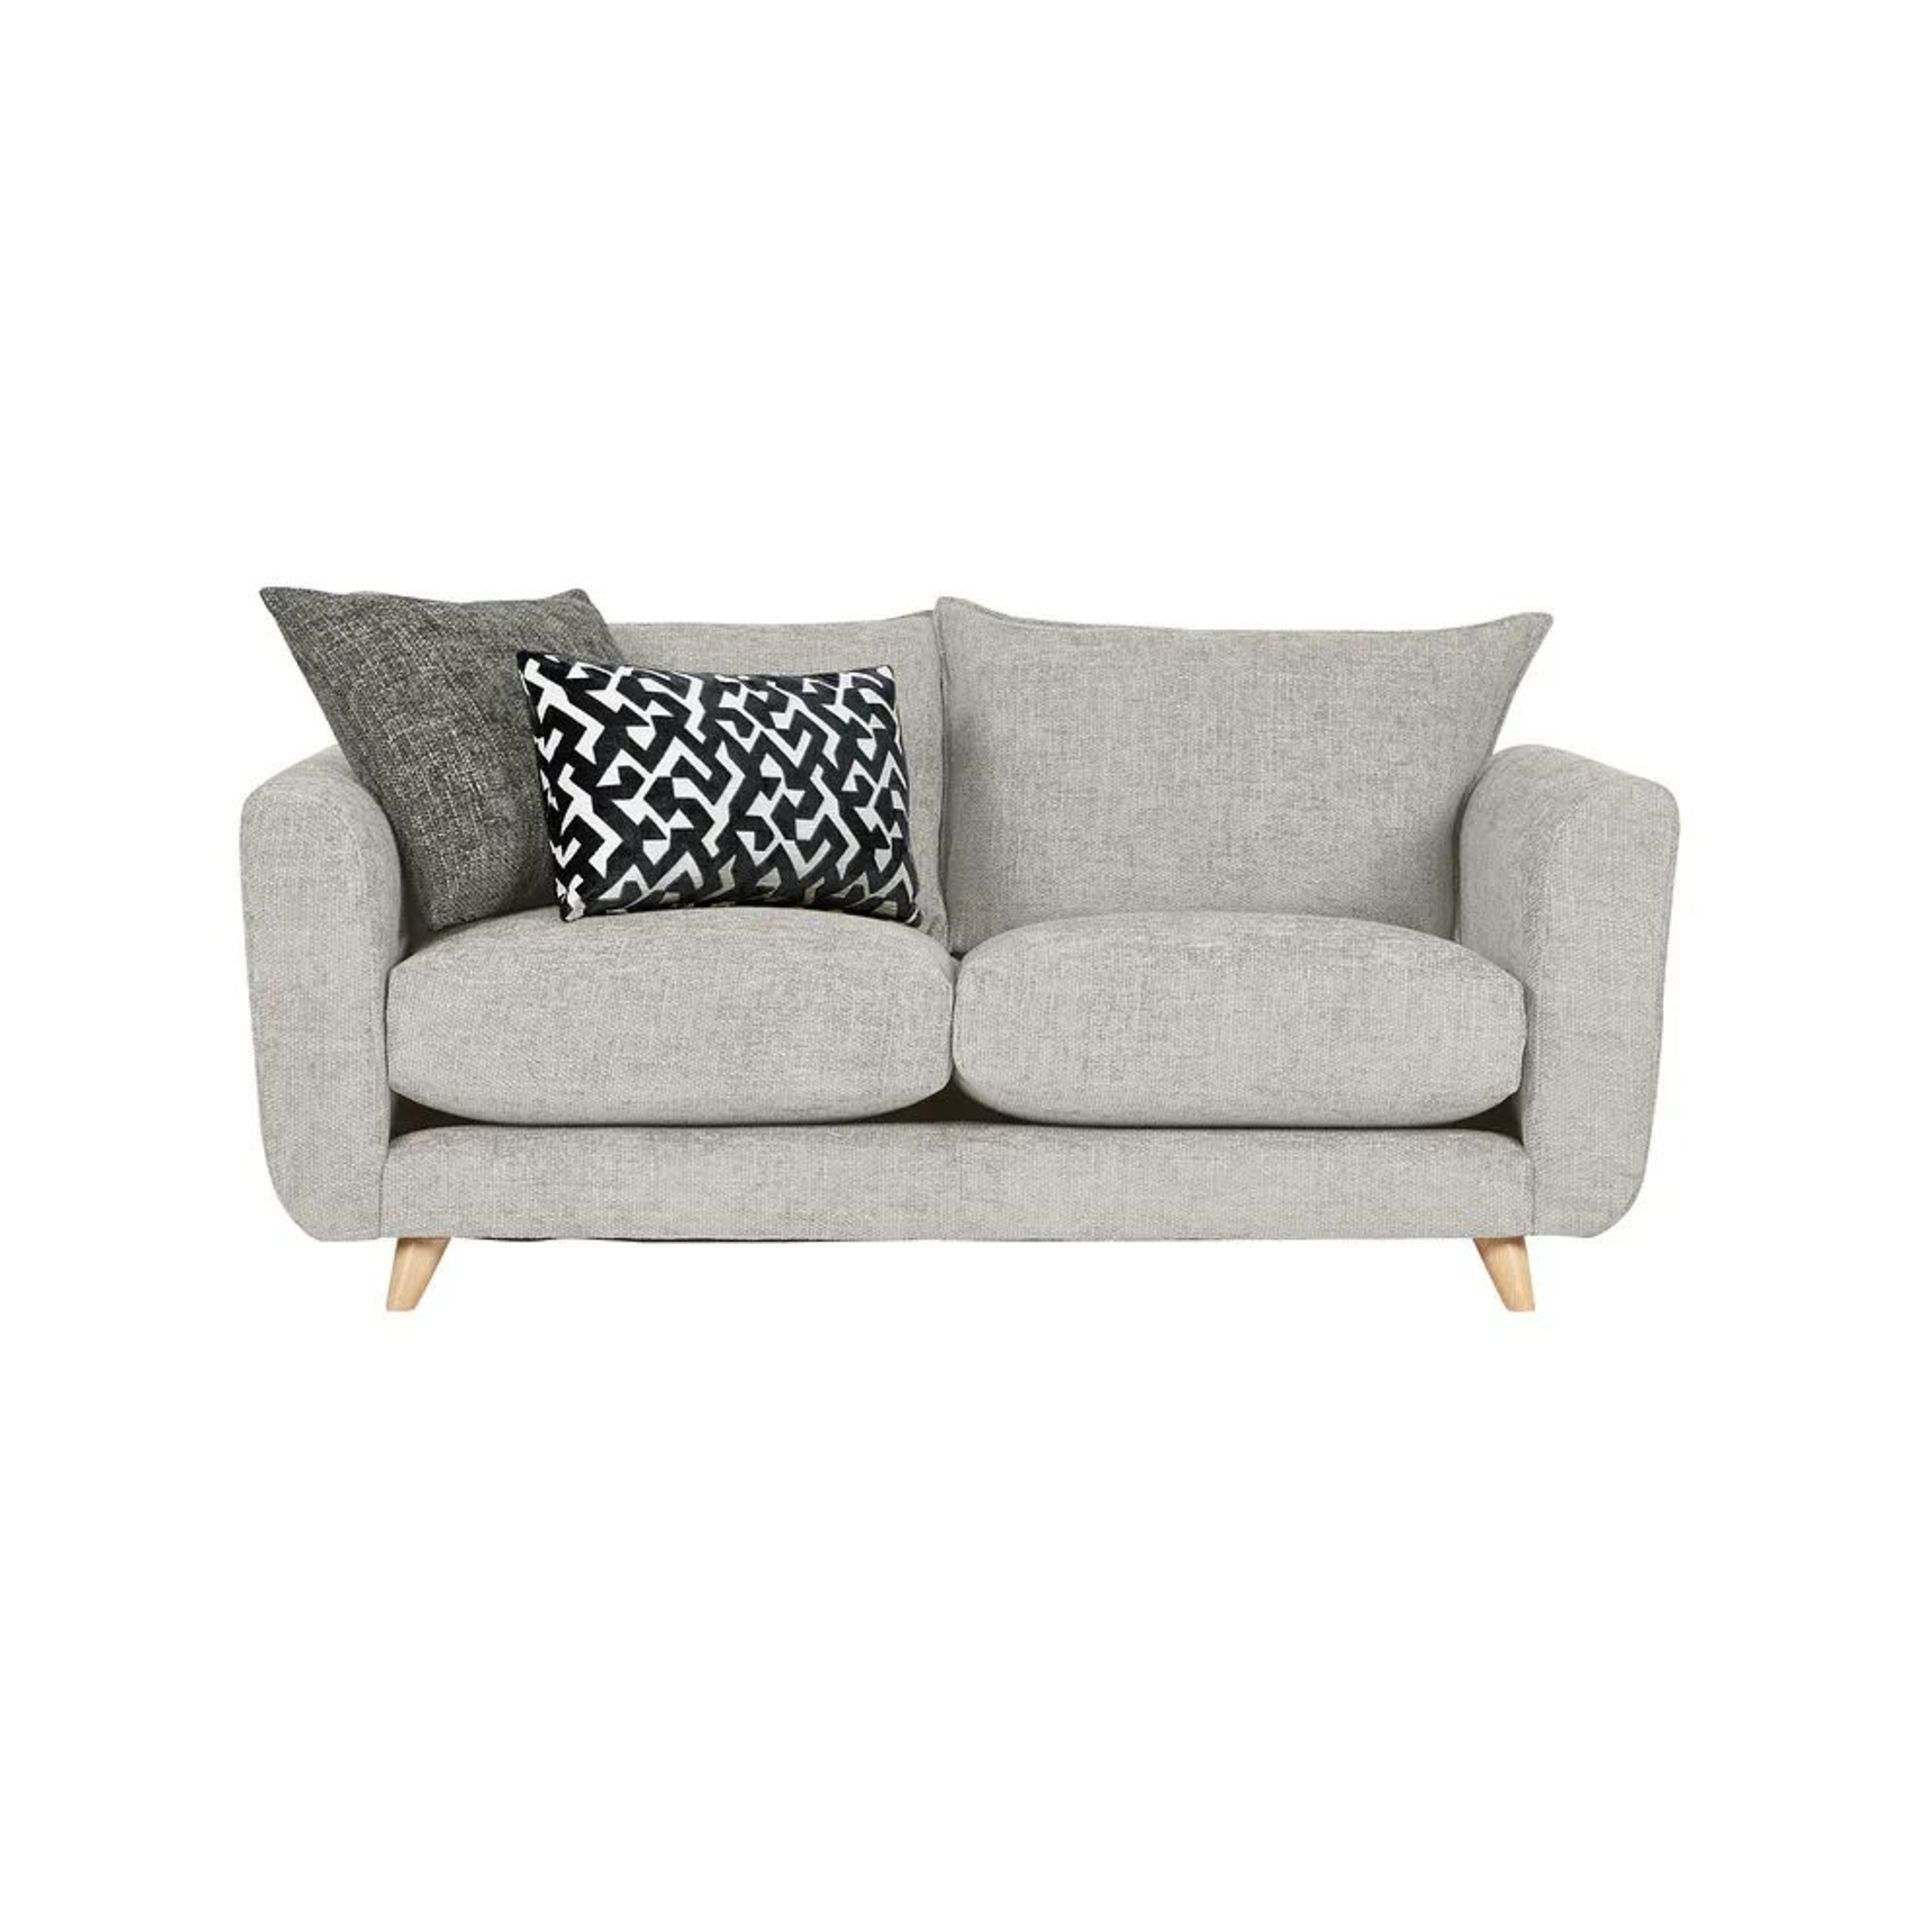 BRAND NEW DALBY 3 Seater Sofa - SILVER FABRIC. RRP £1679. Our Dalby 3-seater sofa, shown here in - Image 2 of 8